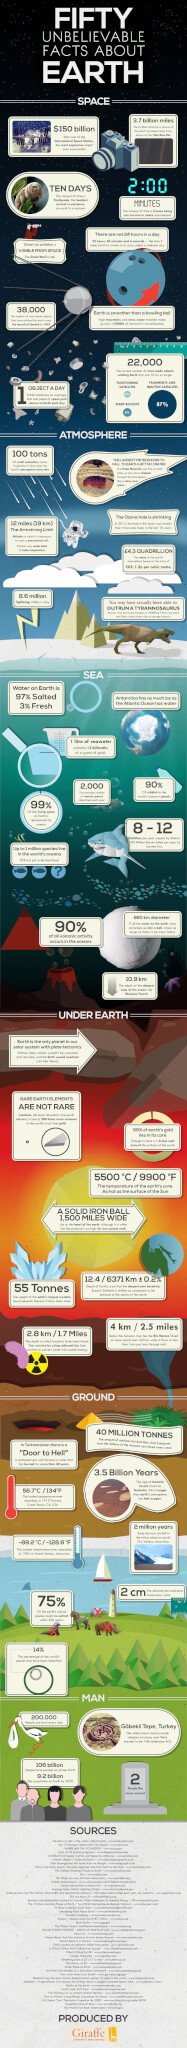 50 awesome facts about earth